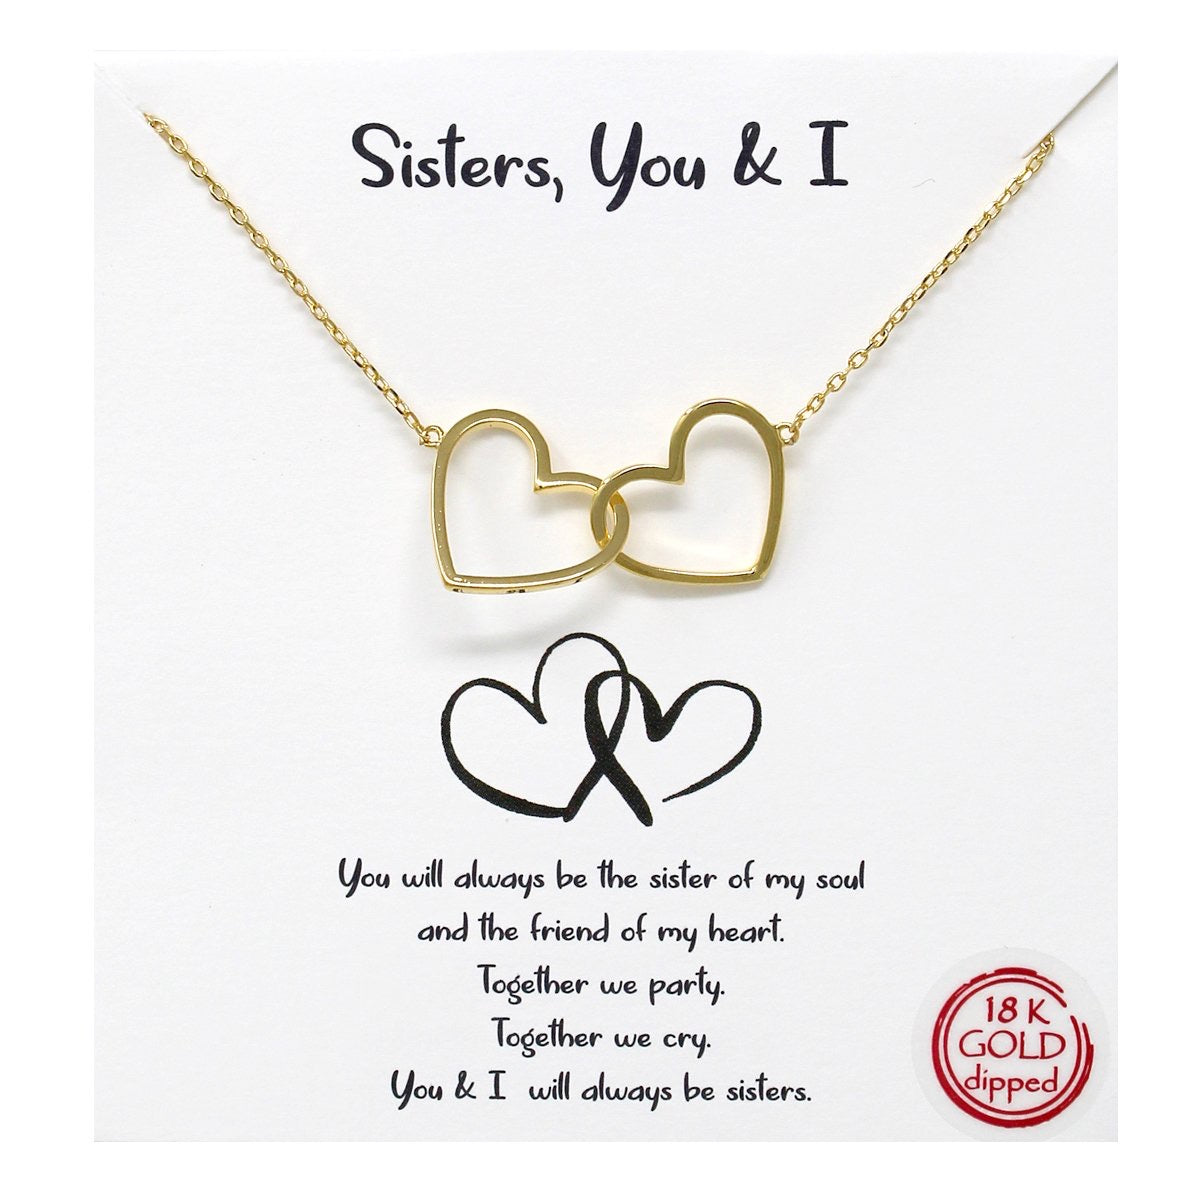 Sisters, You and I 18 K Gold Dipped Necklace